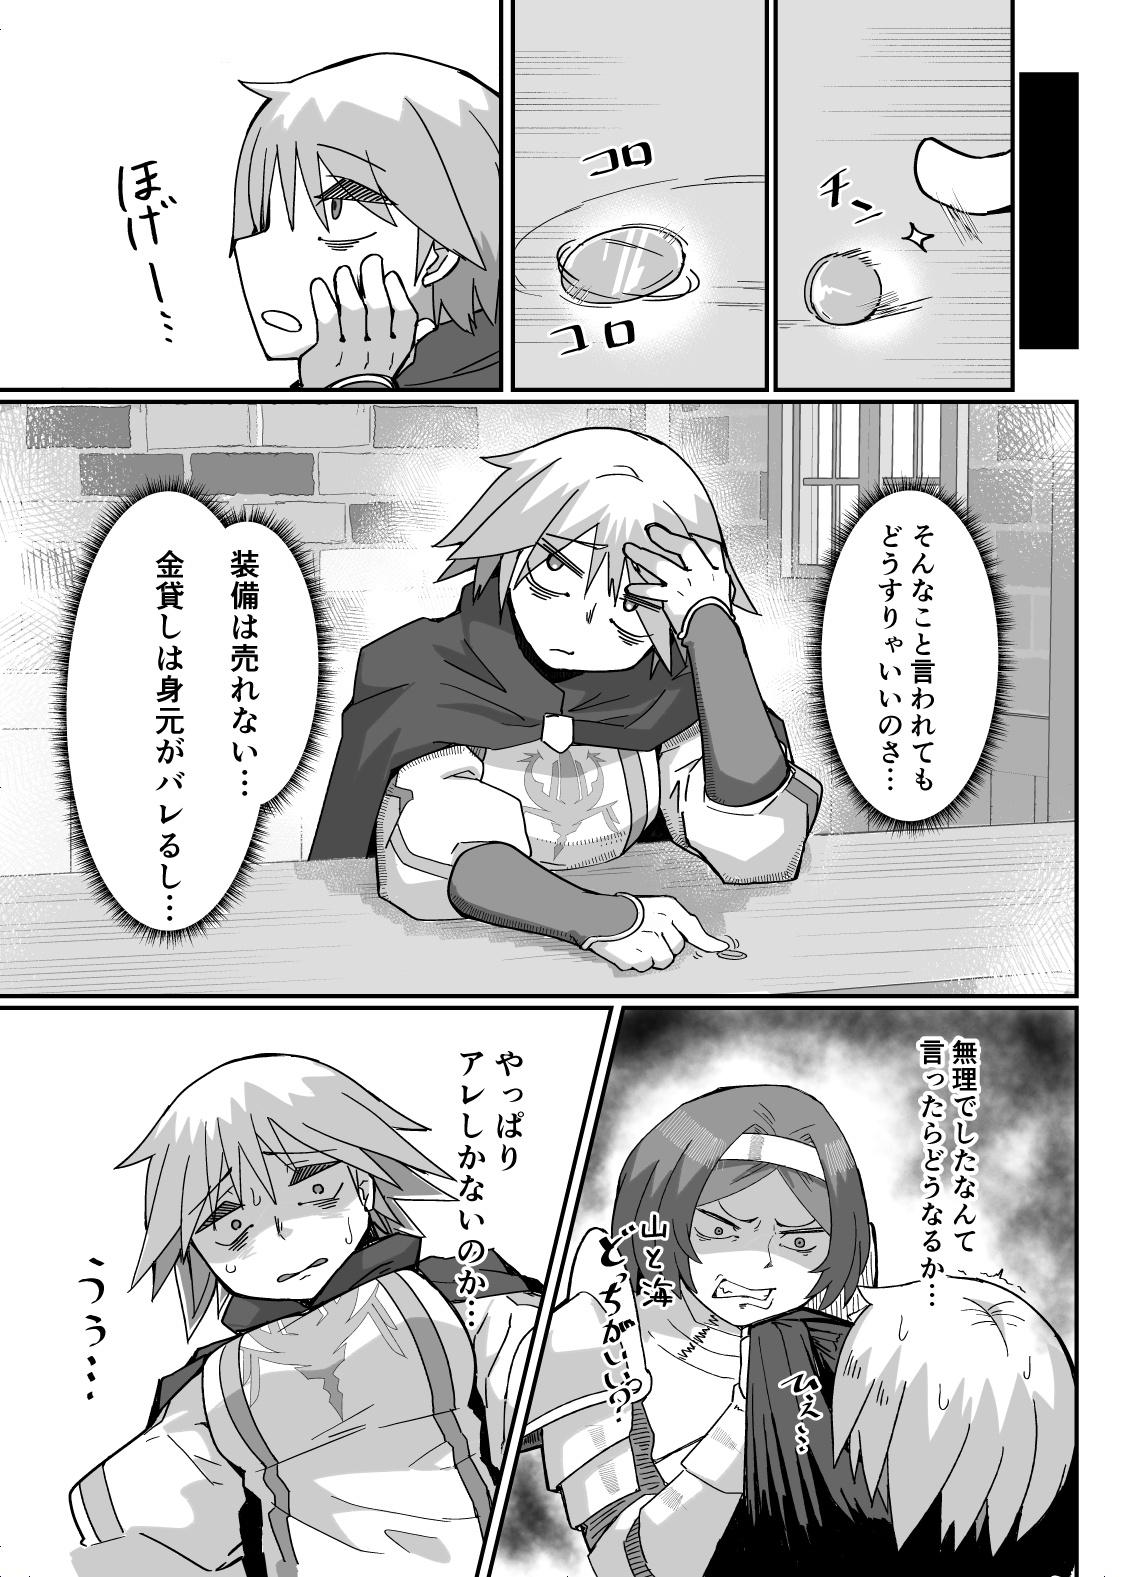 Hugetits Neia-chan's Doujinshi - Overlord Argenta - Page 3